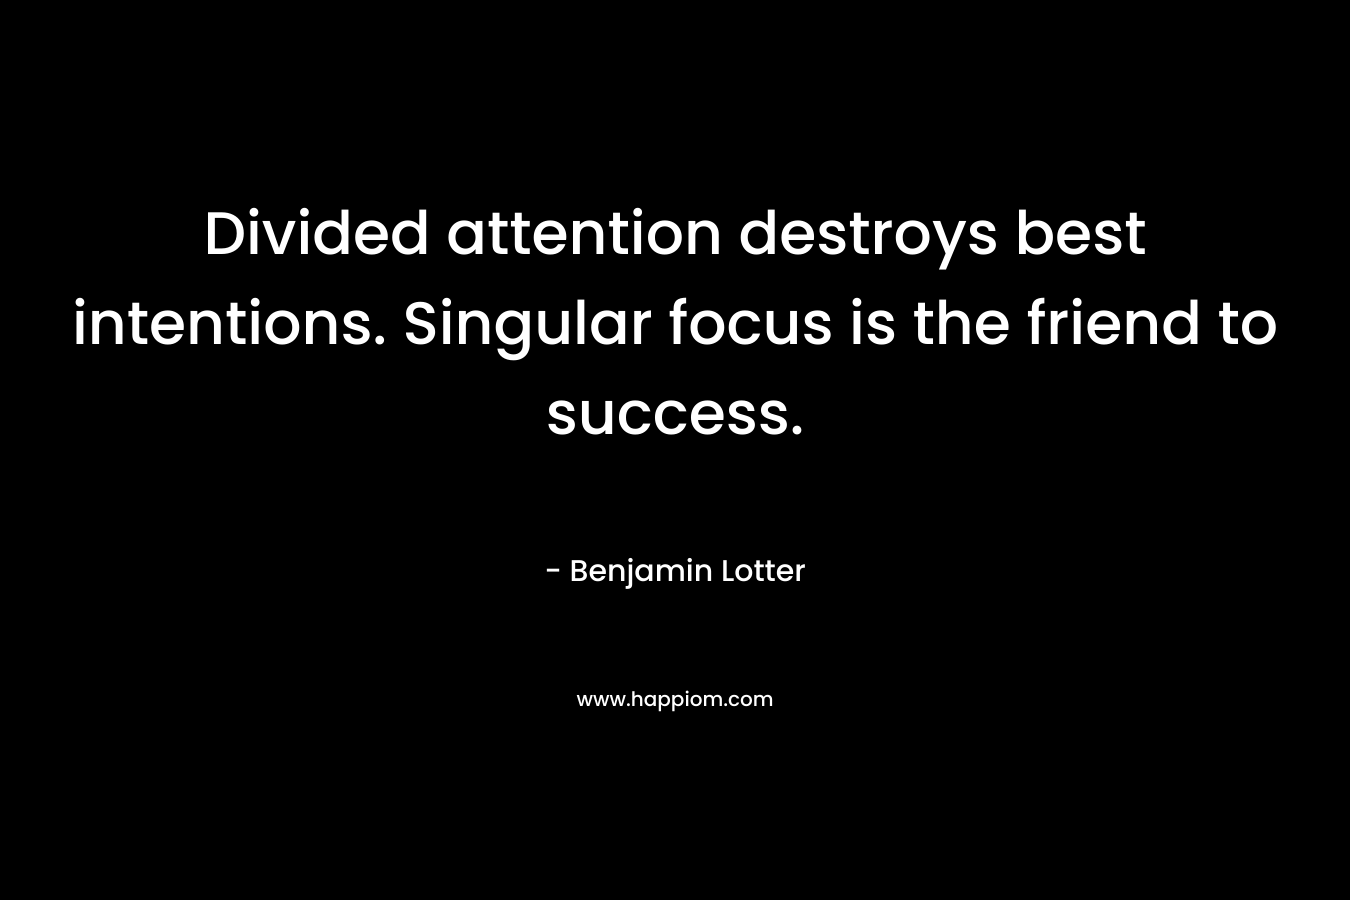 Divided attention destroys best intentions. Singular focus is the friend to success. – Benjamin Lotter